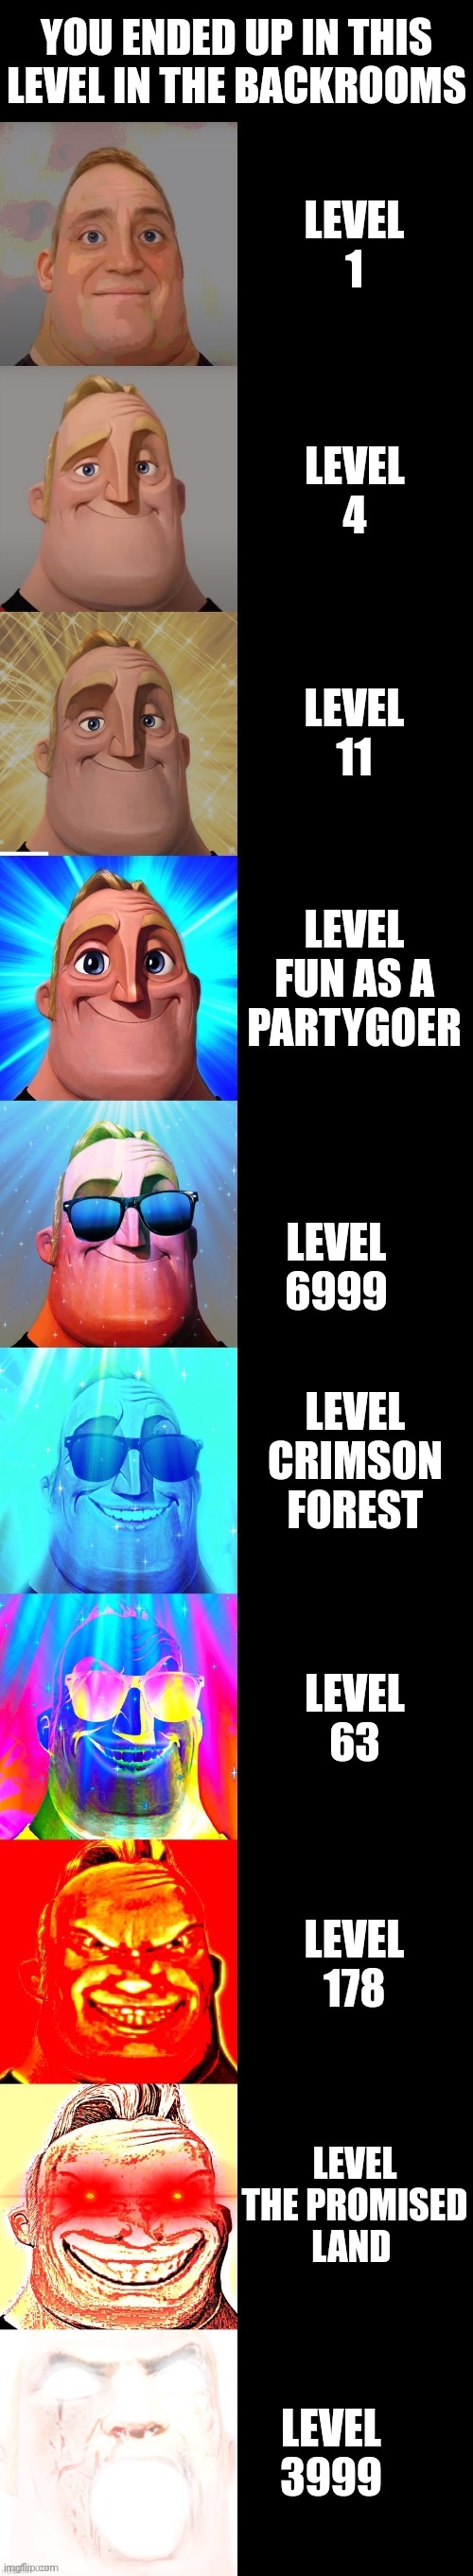 mr incredible becoming canny | YOU ENDED UP IN THIS LEVEL IN THE BACKROOMS; LEVEL 1; LEVEL 4; LEVEL 11; LEVEL FUN AS A PARTYGOER; LEVEL 6999; LEVEL CRIMSON FOREST; LEVEL 63; LEVEL 178; LEVEL THE PROMISED LAND; LEVEL 3999 | image tagged in mr incredible becoming canny | made w/ Imgflip meme maker